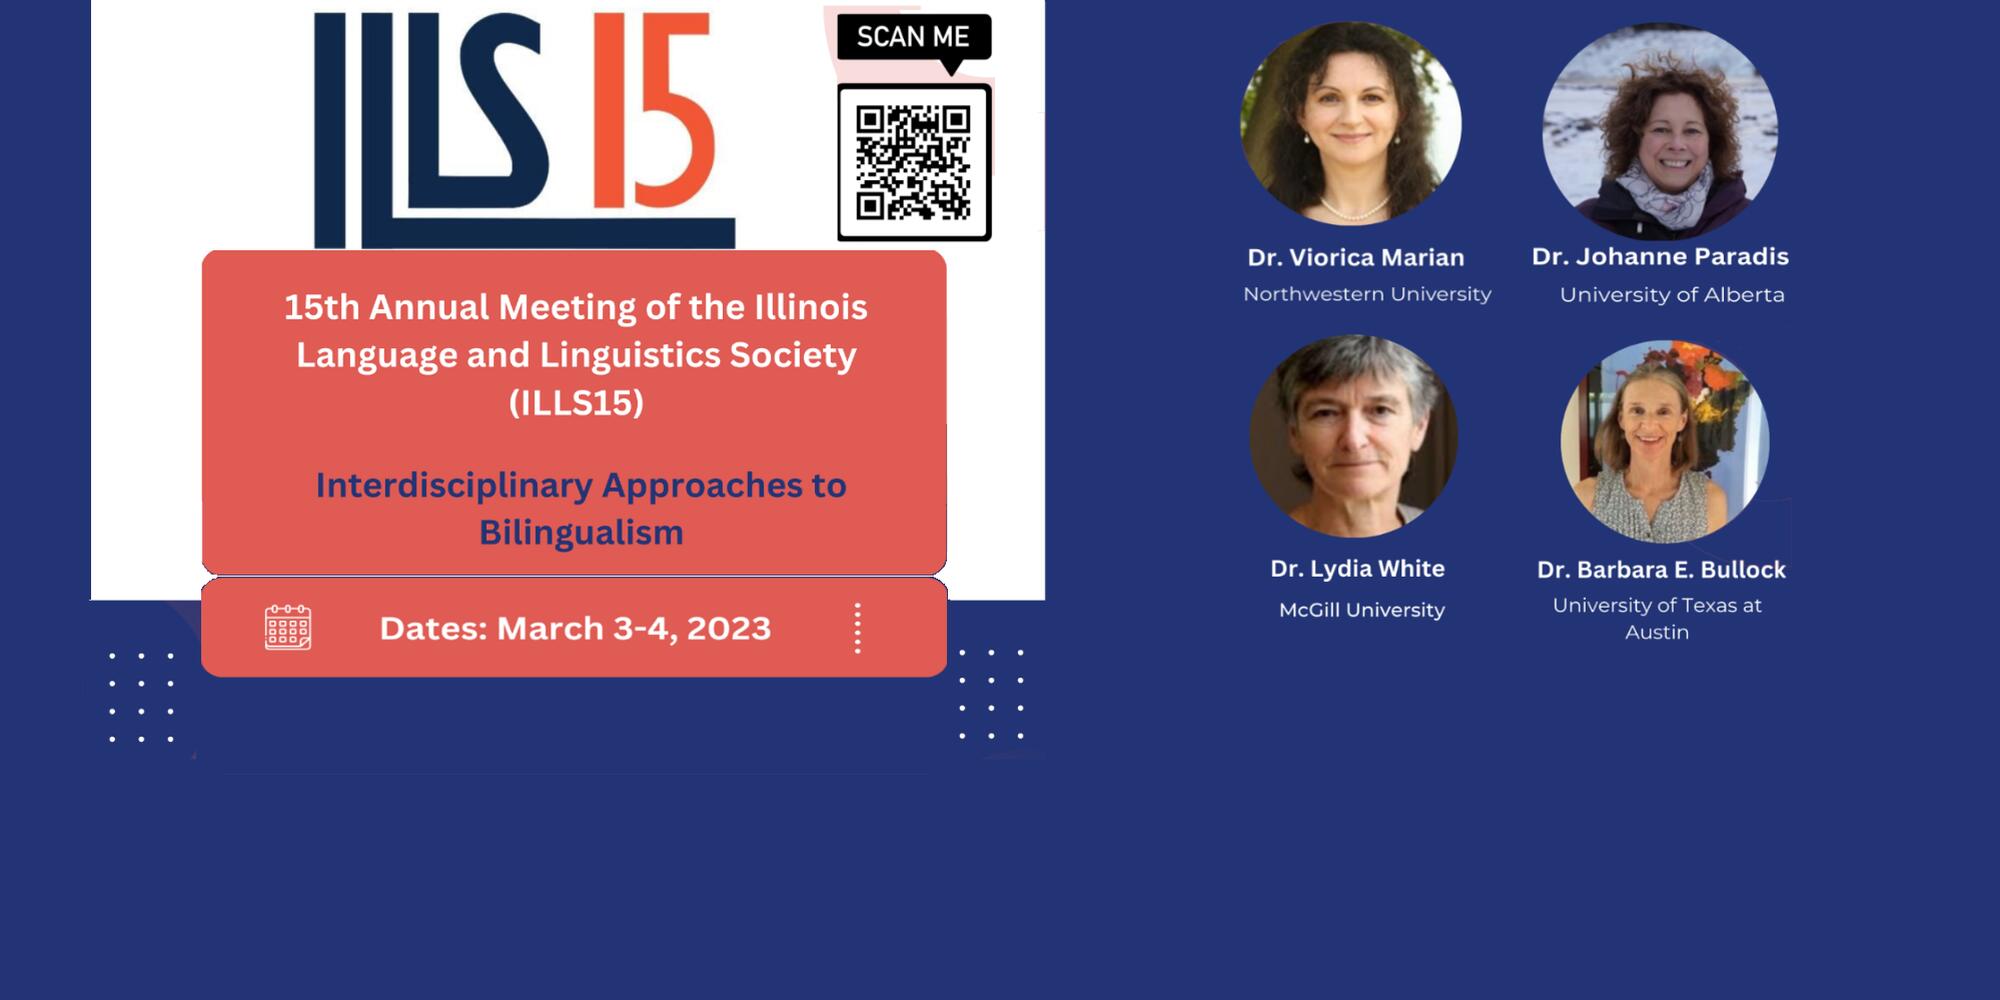 ILLS 15 poster with title and plenary speakers